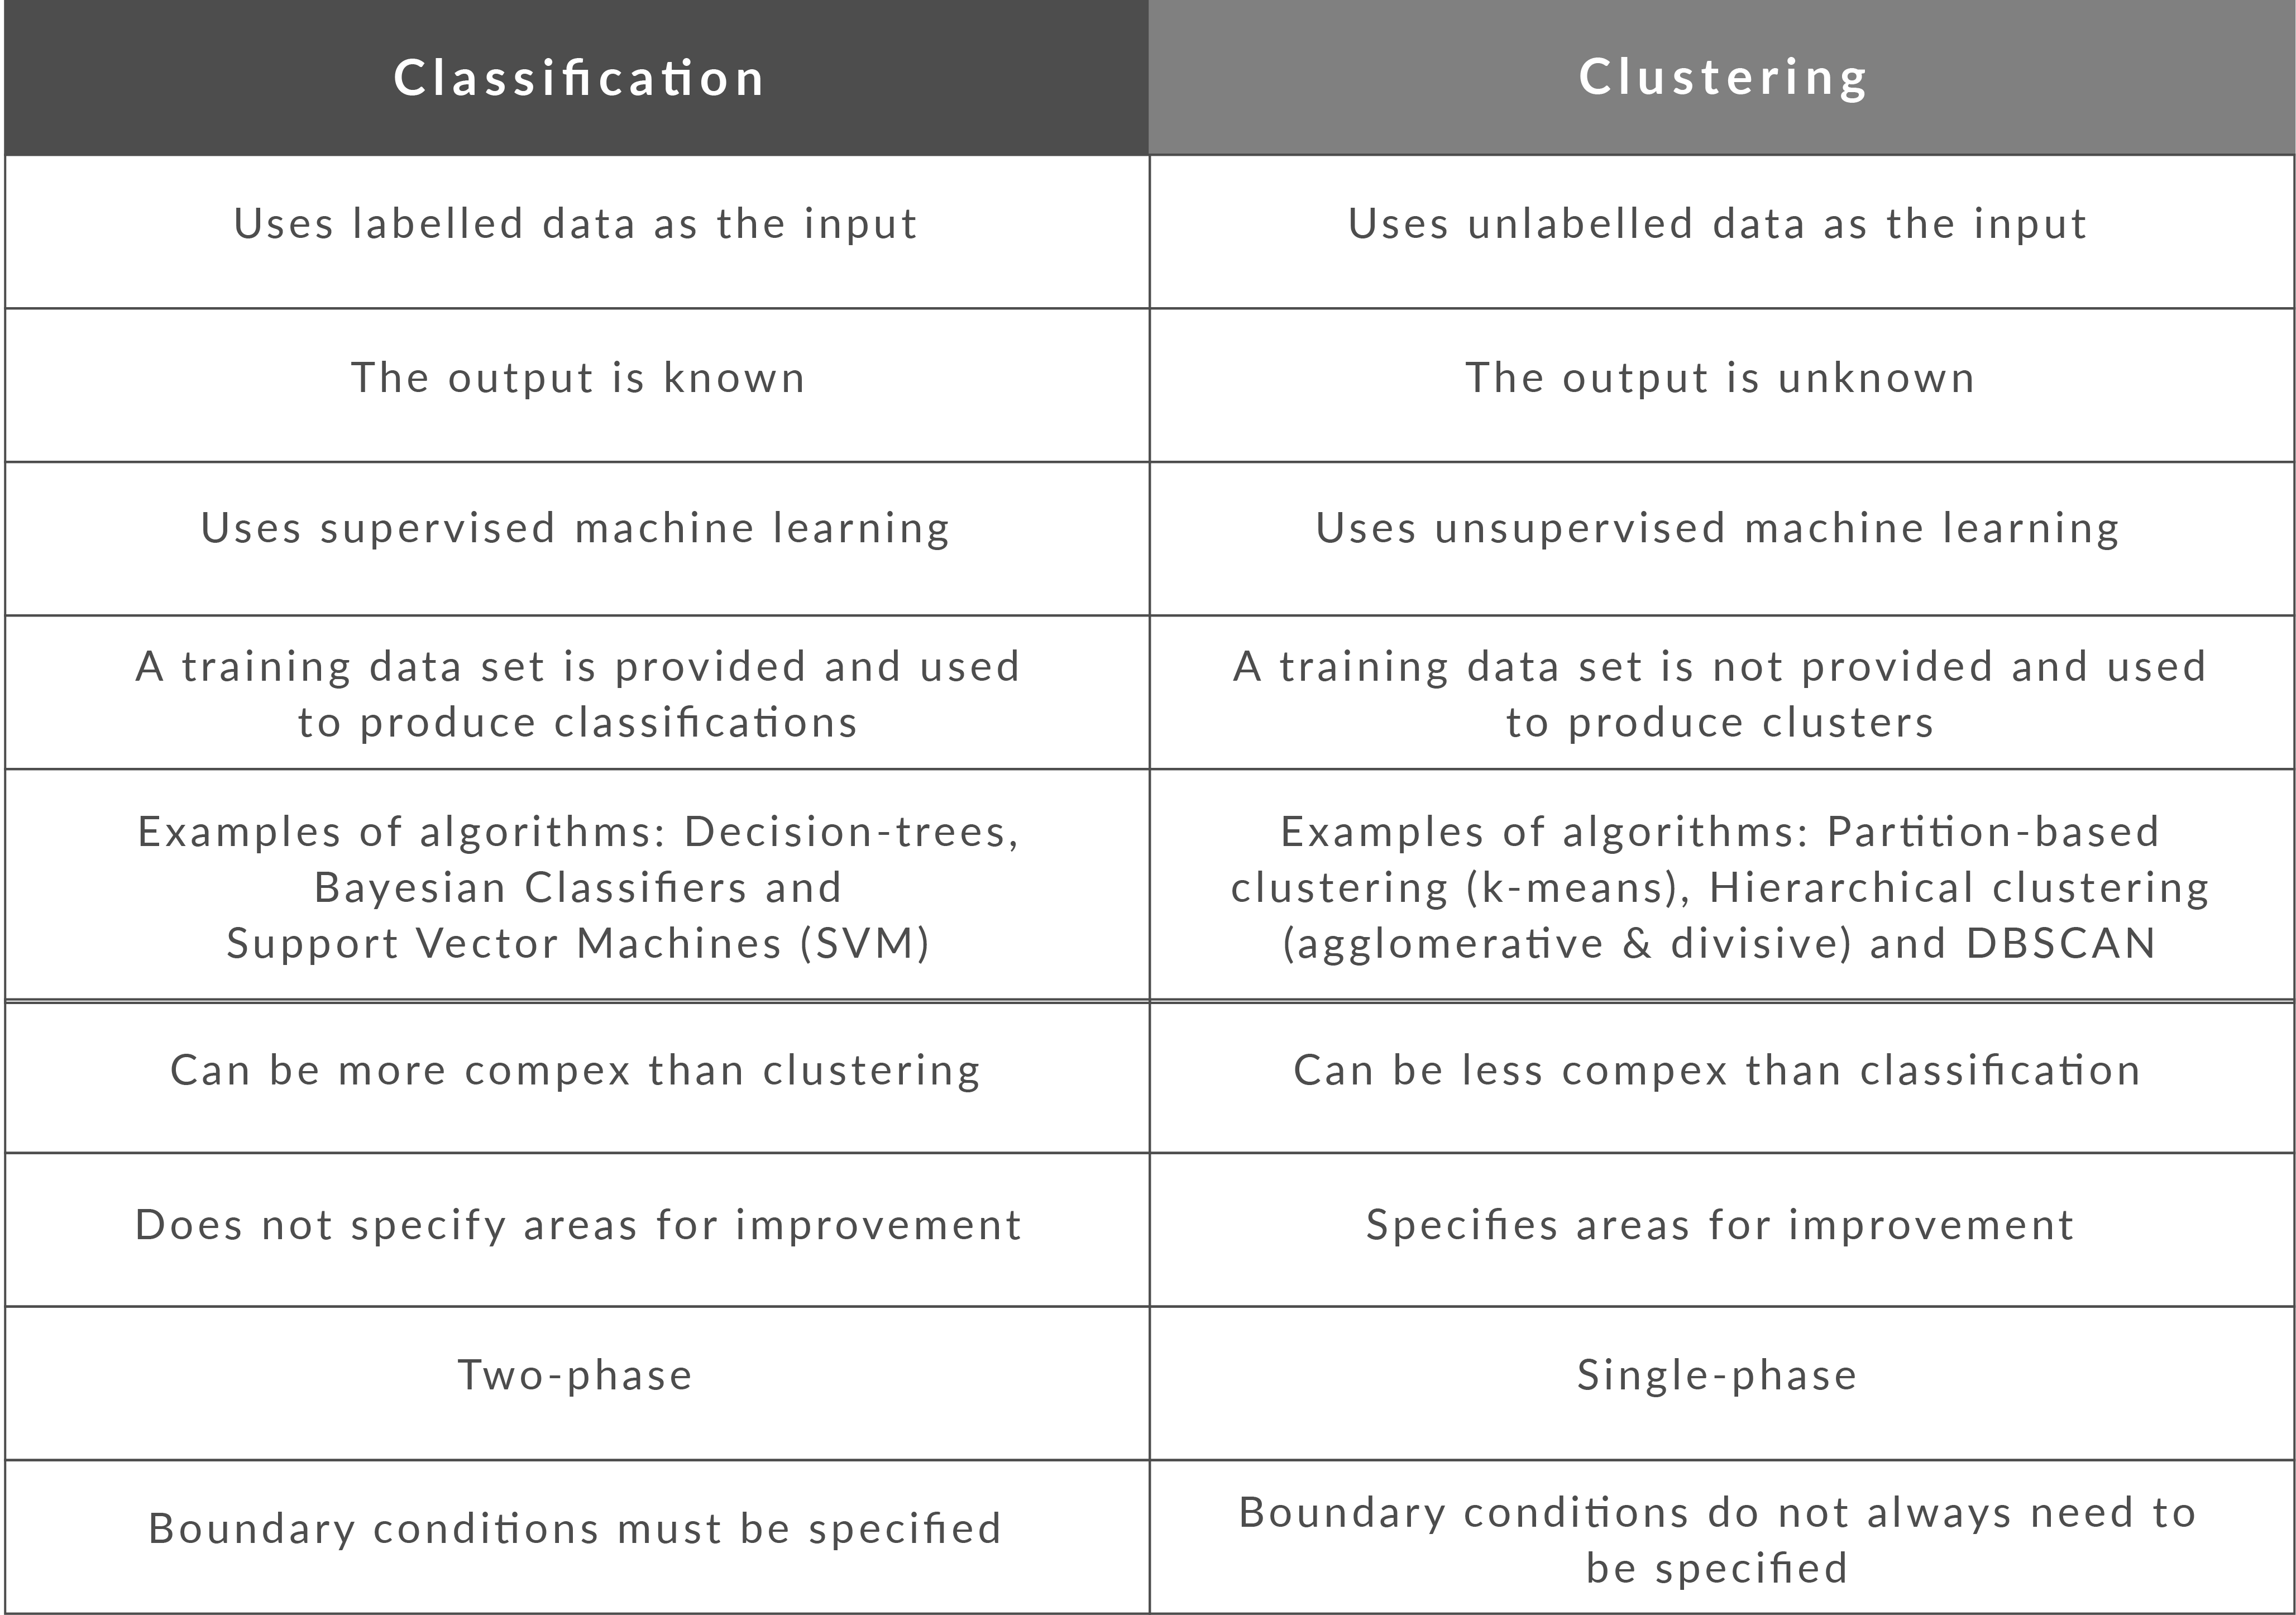 What are two differences between classification and clustering?